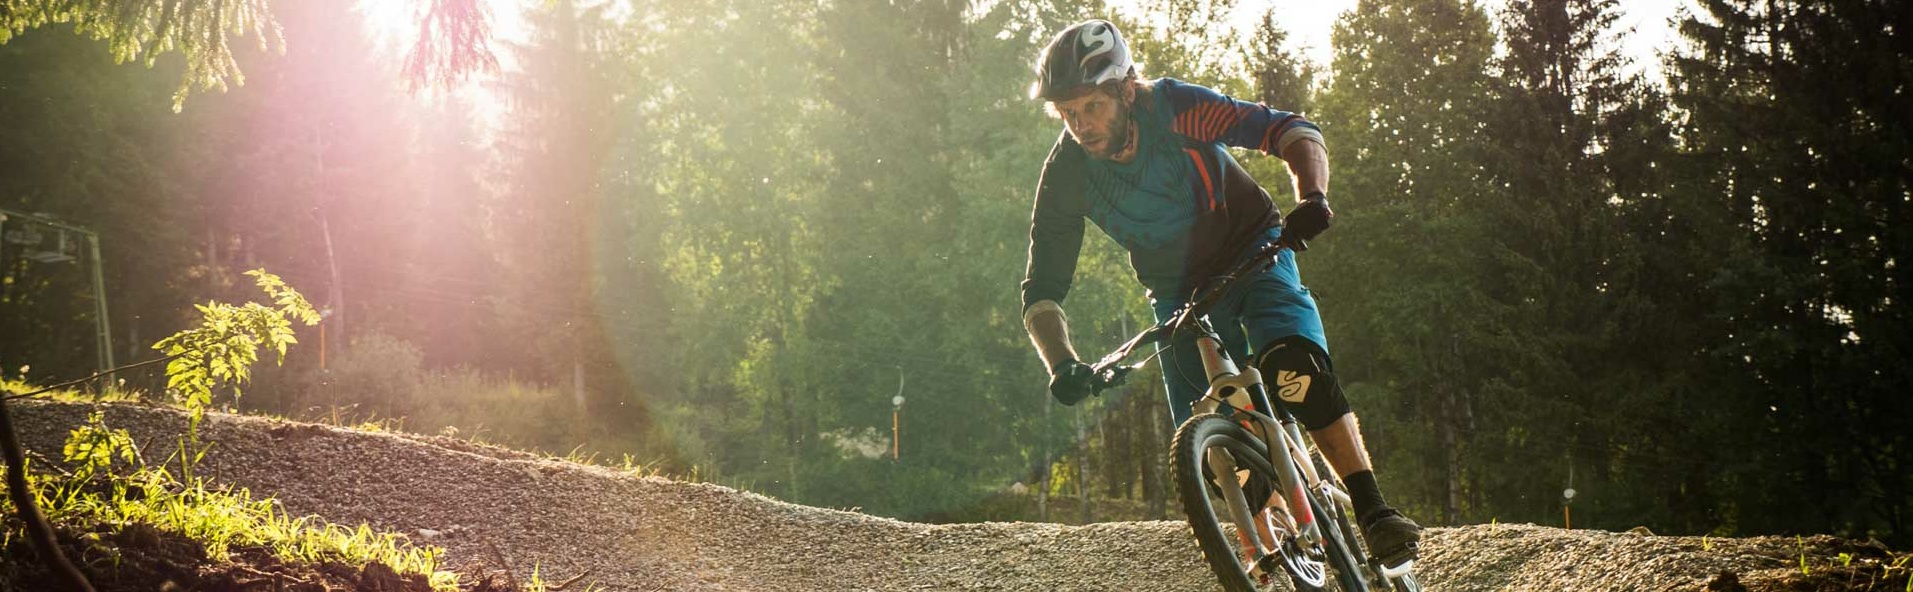 Mountain biker in a curve on a flow trail at the edge of the forest